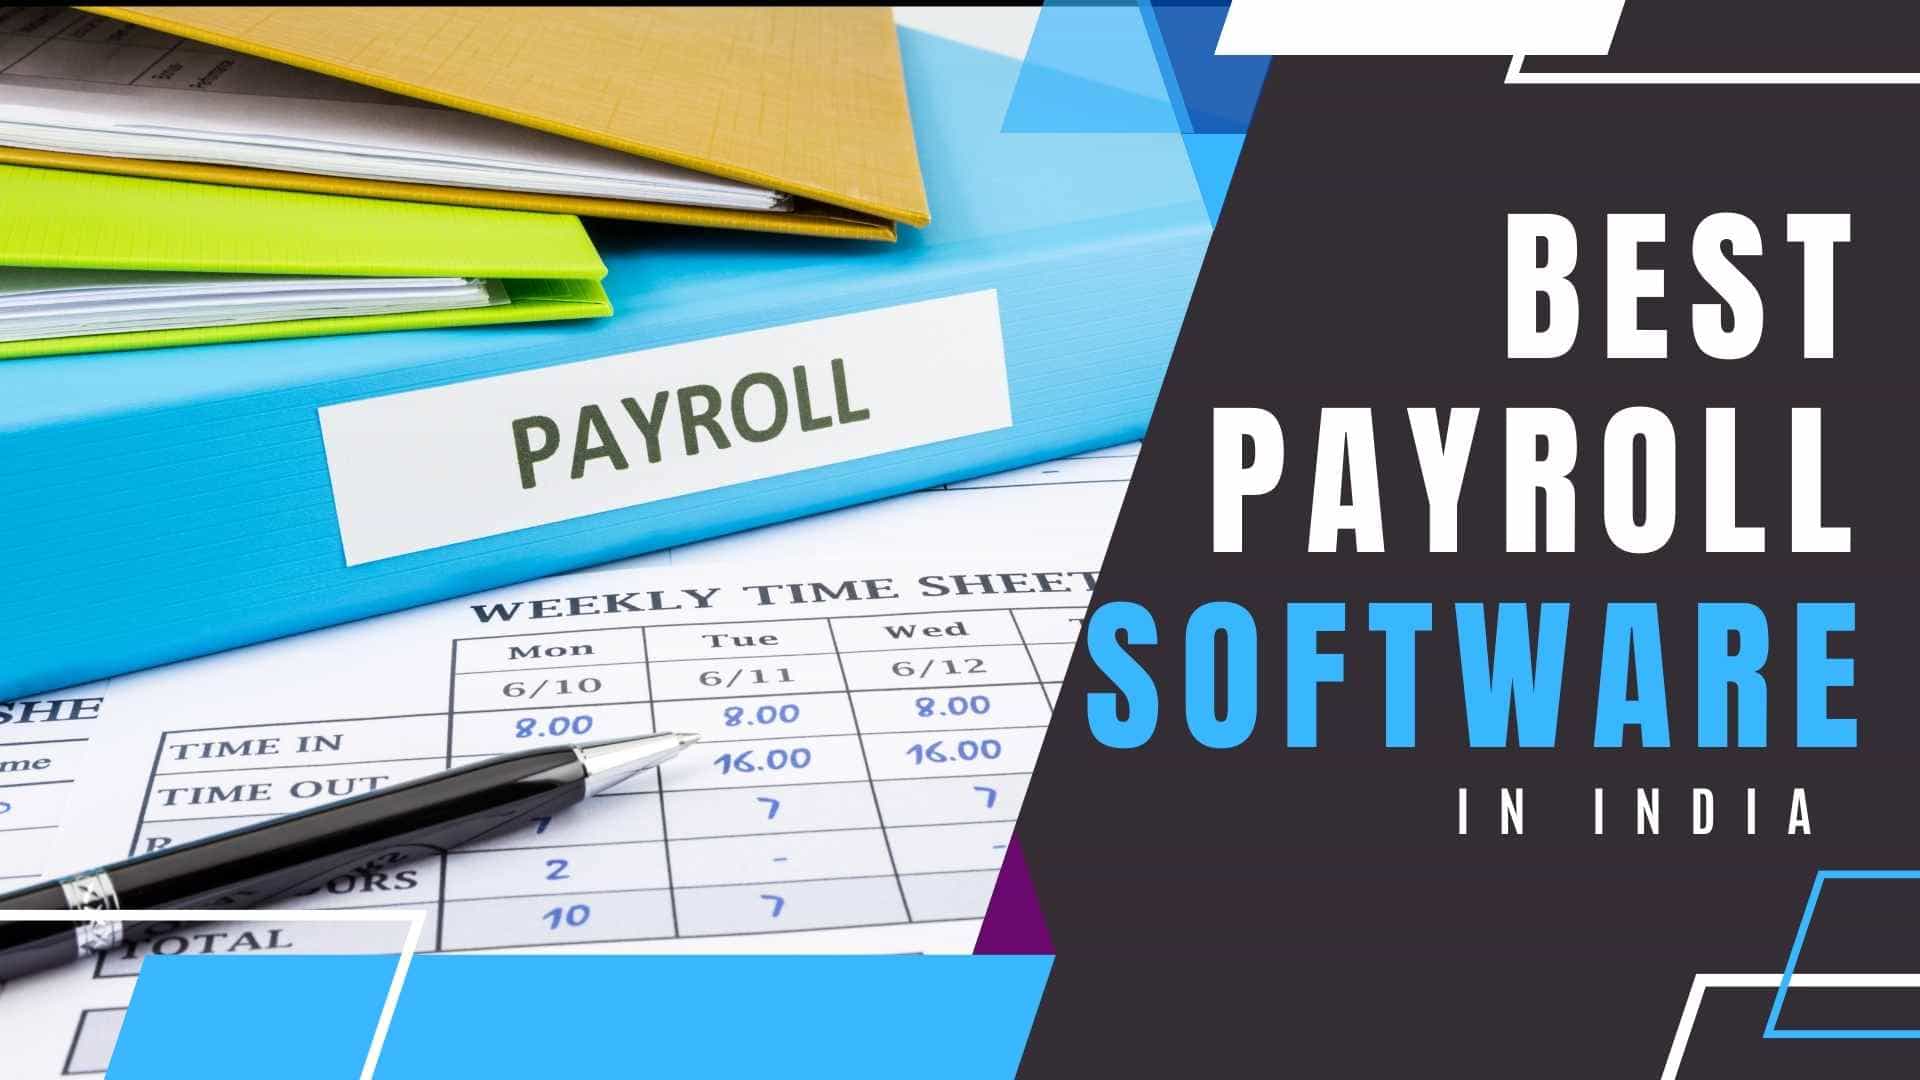 The best payroll software in India to use in 2023